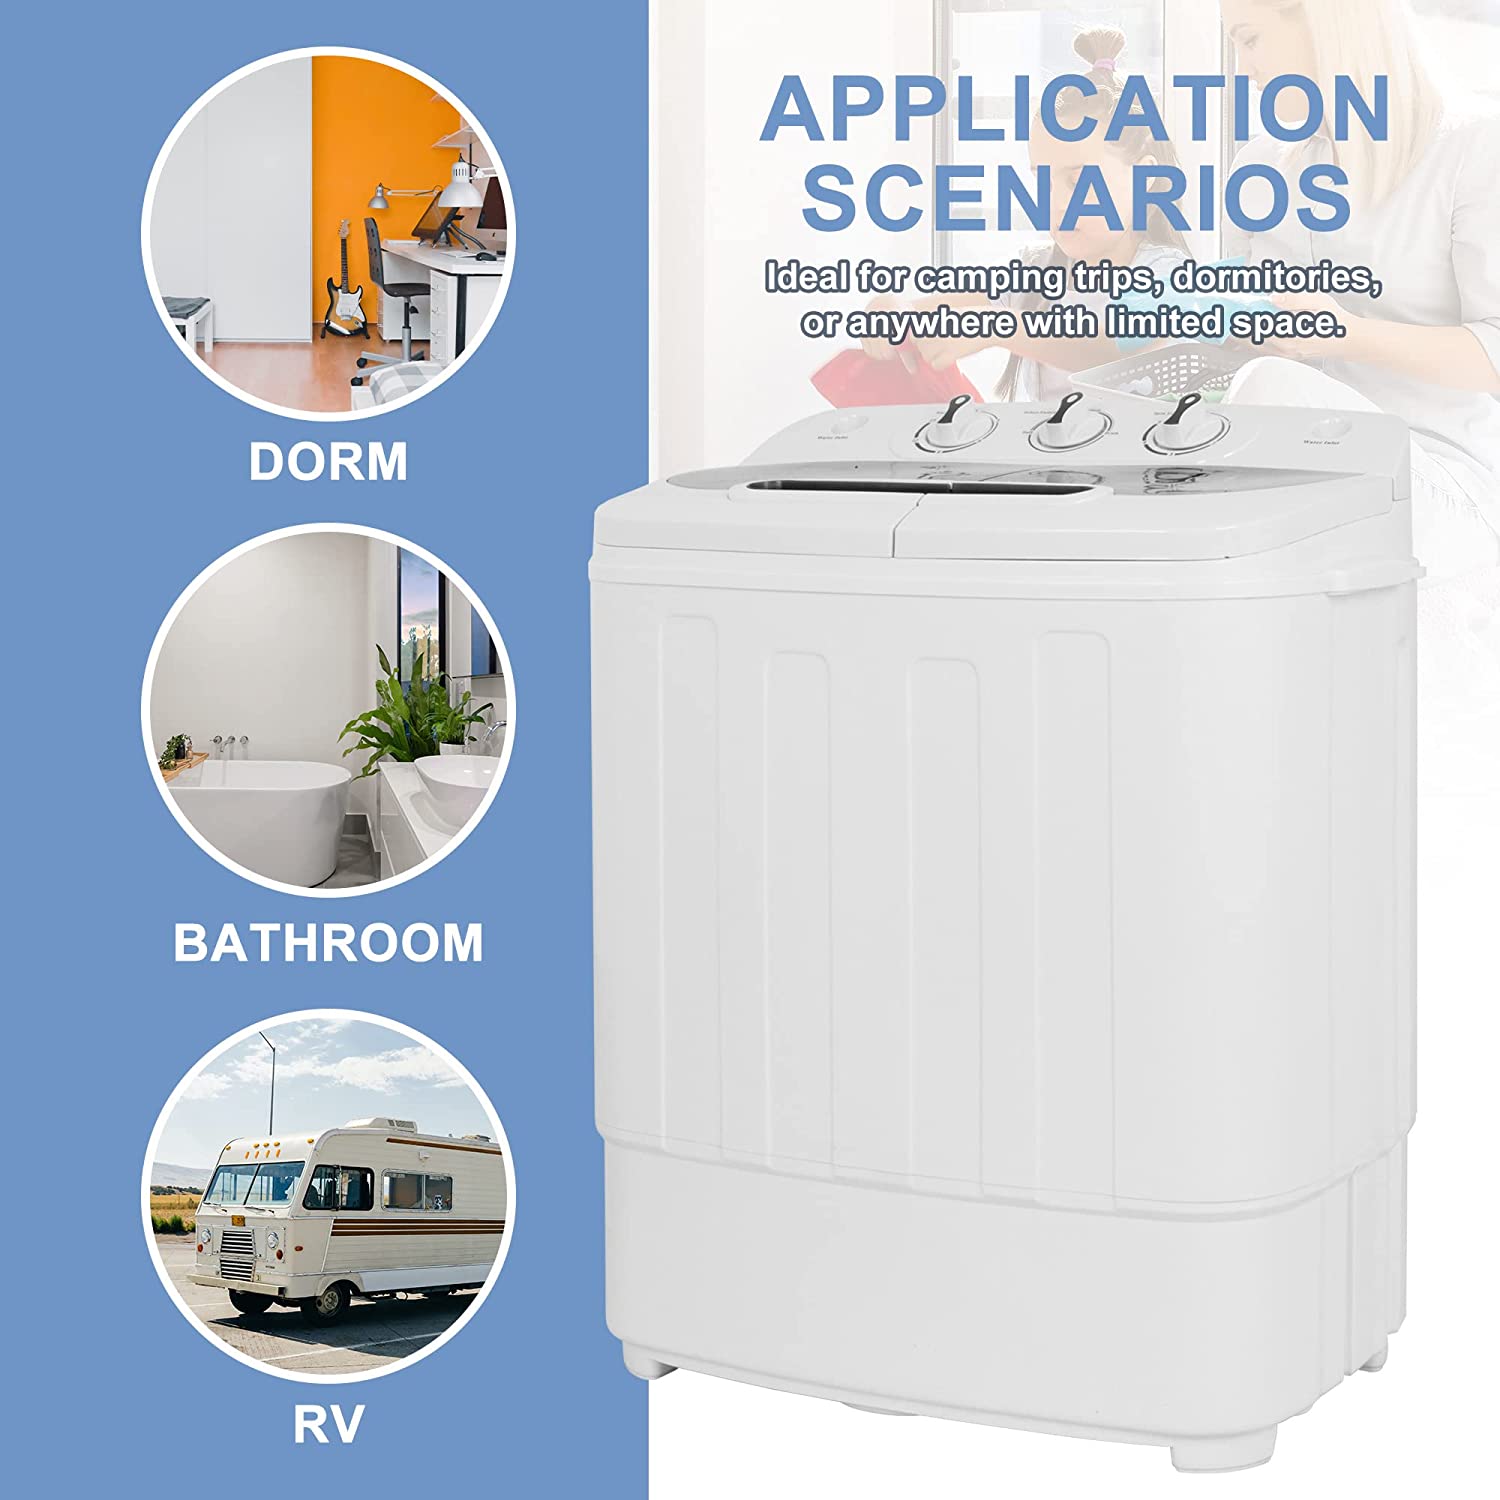 SUPER DEAL Compact Mini Twin Tub Washing Machine, Portable Laundry Washer  w/Wash and Spin Cycle Combo, Built-in Gravity Drain, 13lbs Capacity for  Camping, Apartments, Dorms, College Rooms, RV's and more